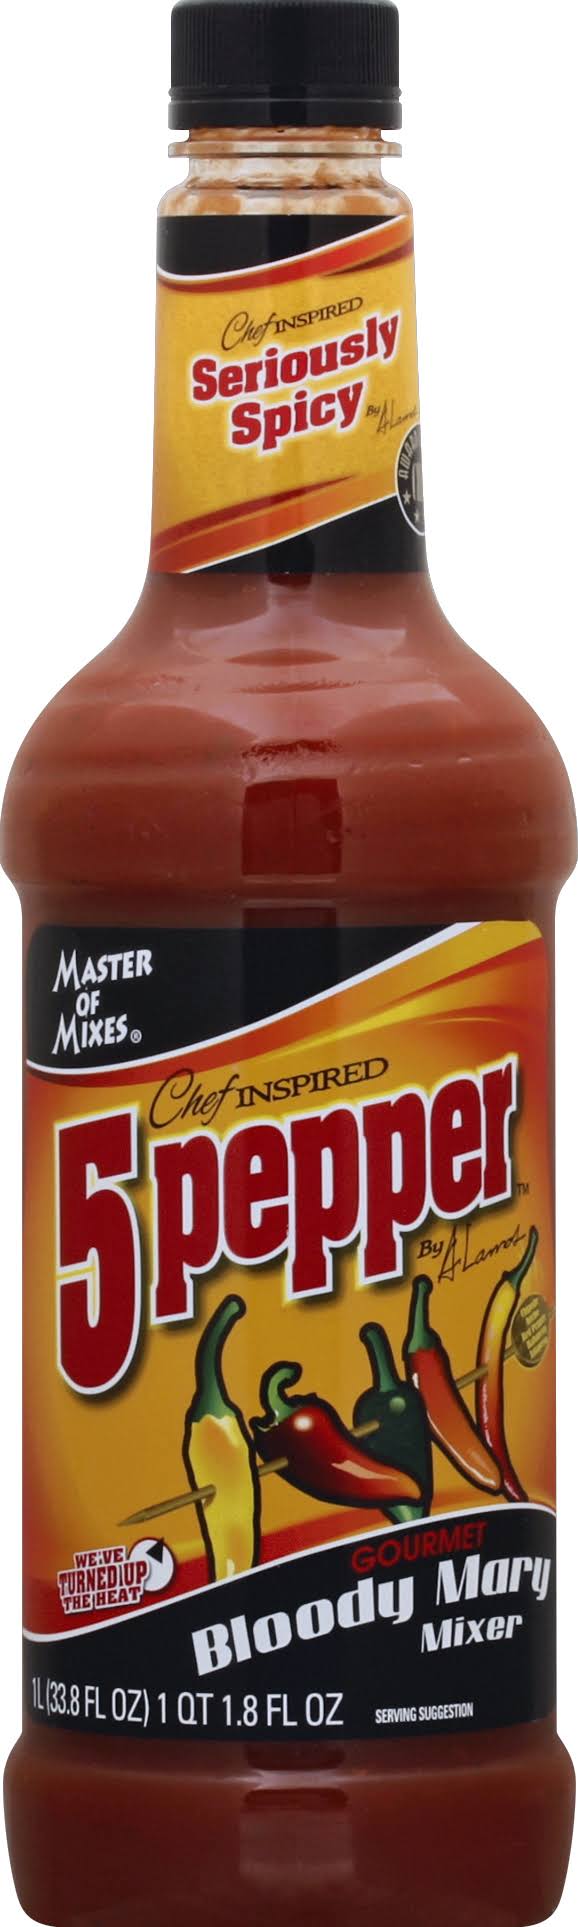 Master of Mixes 5 Pepper Drink Mix - Extra Spicy, Bloody Mary, 1L